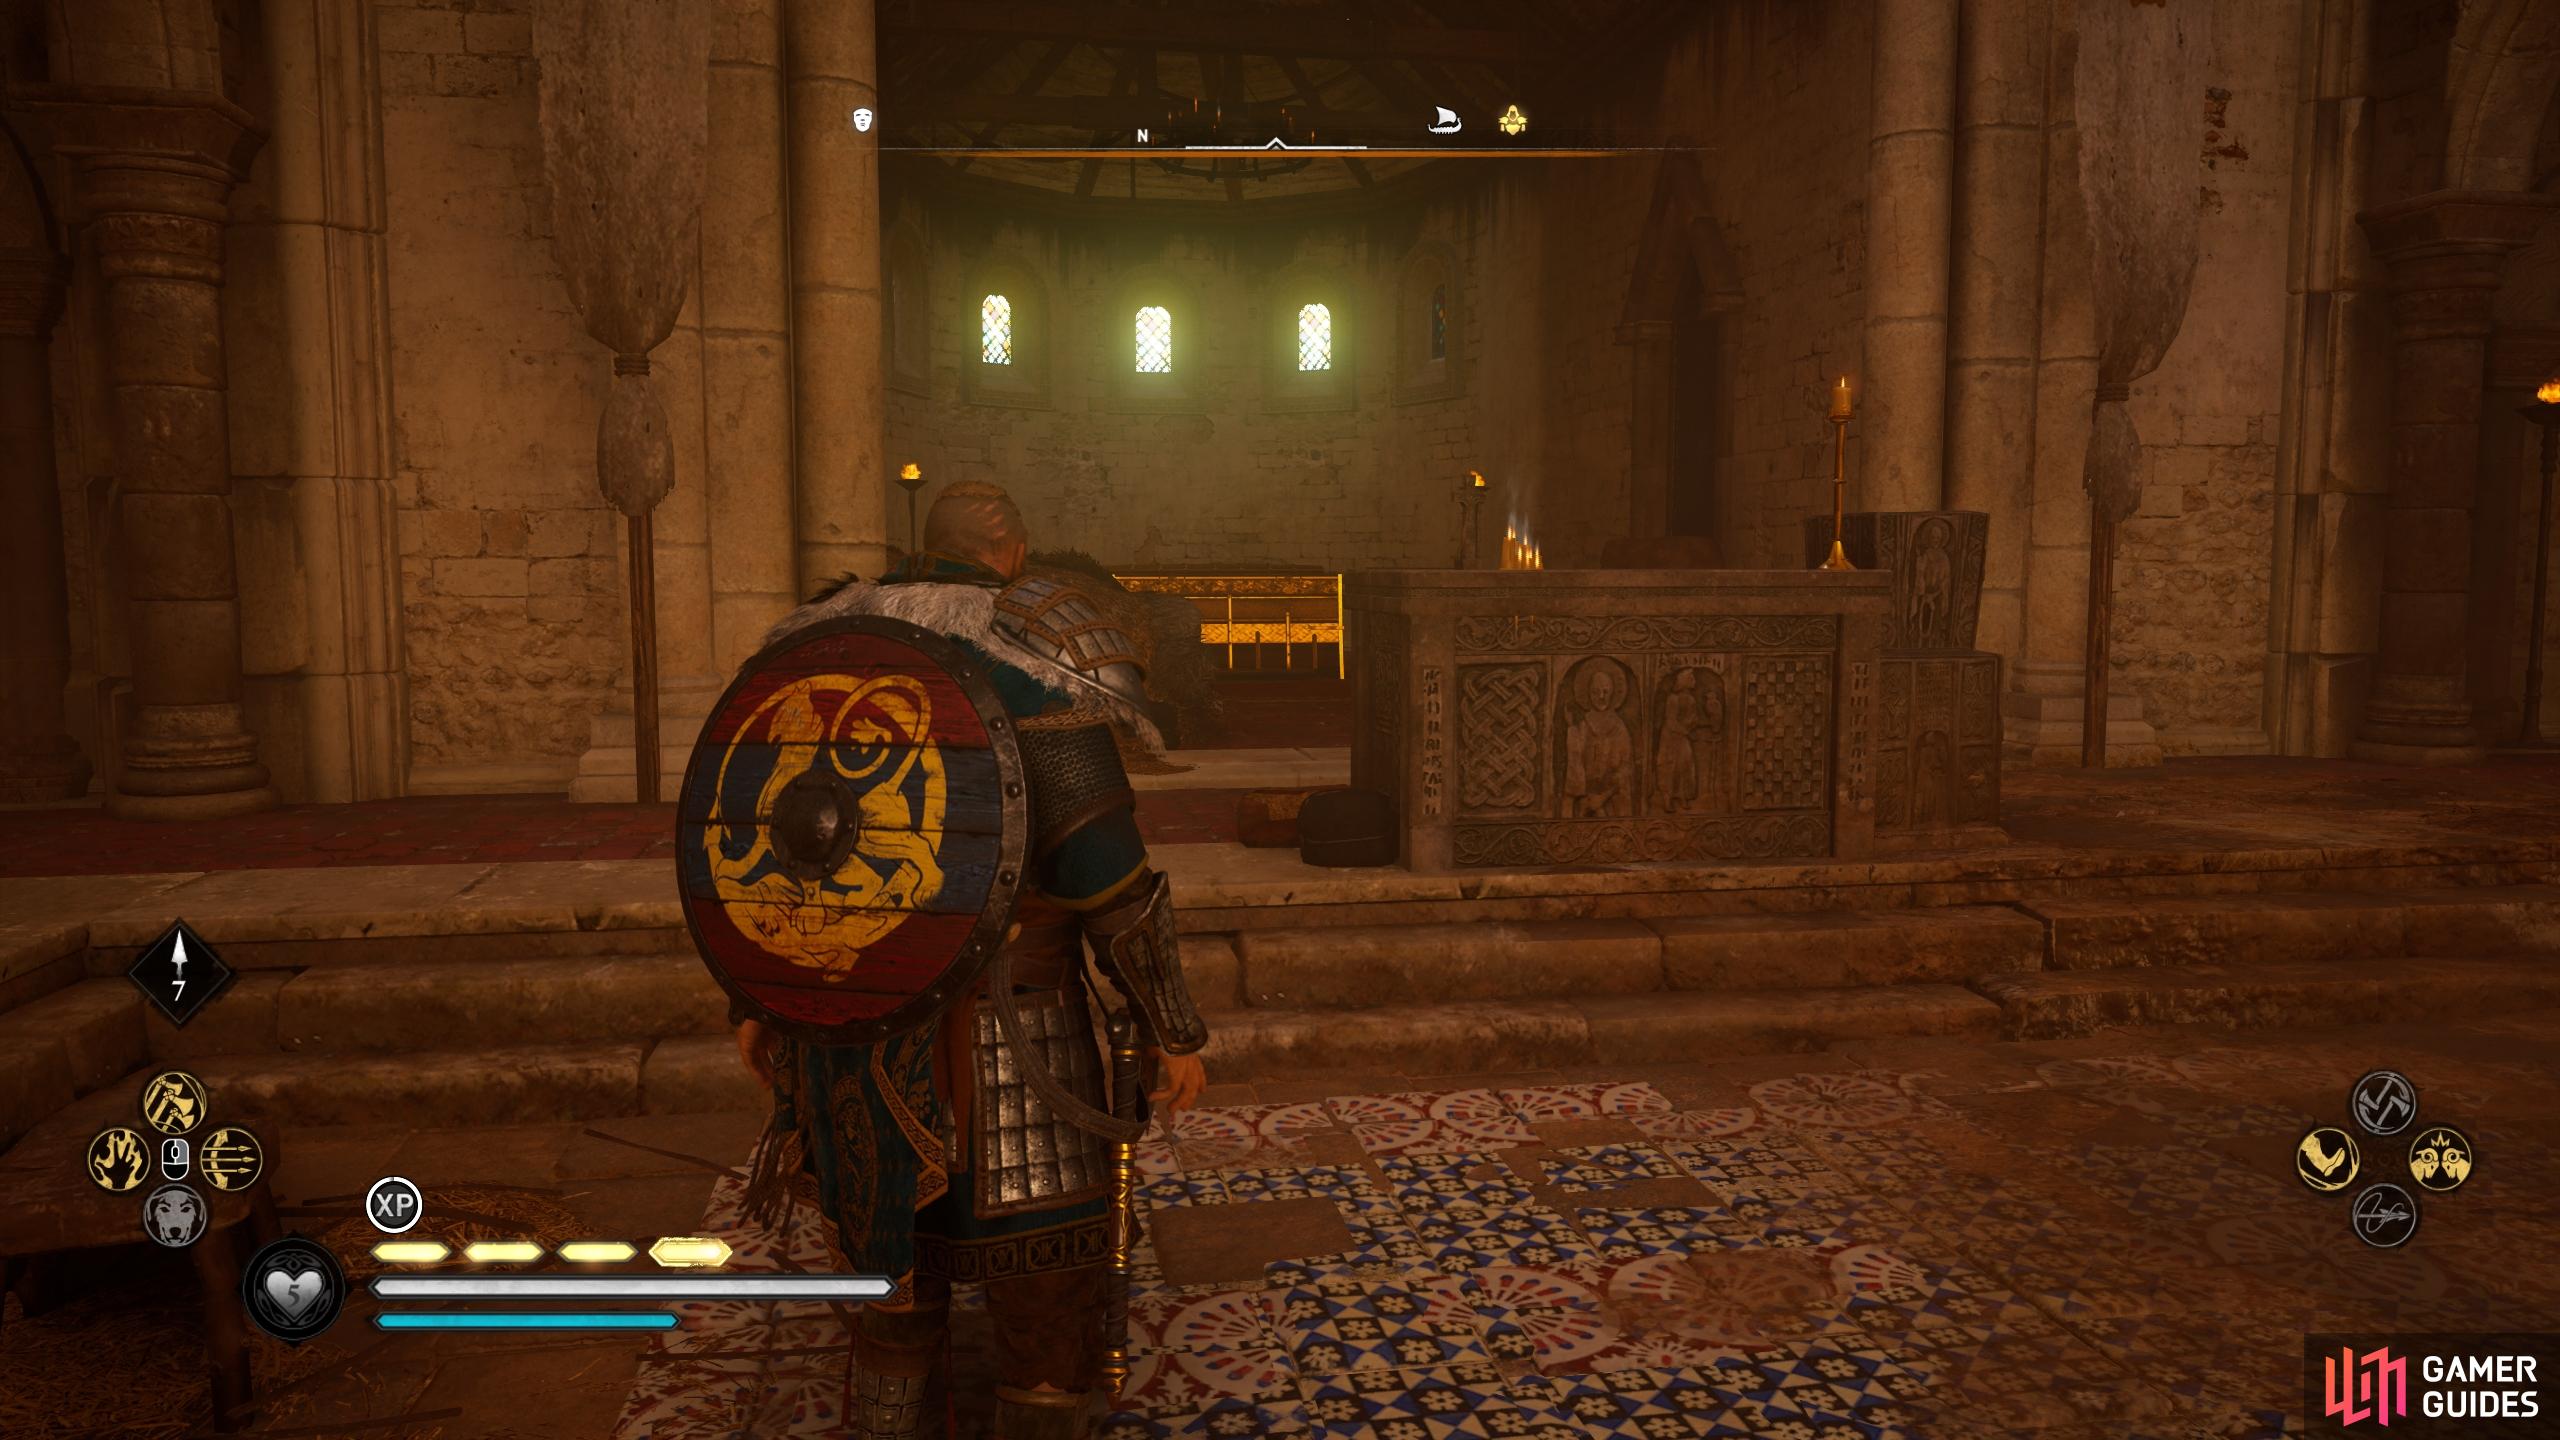 You'll find the first chest behind the altar in the abbey.